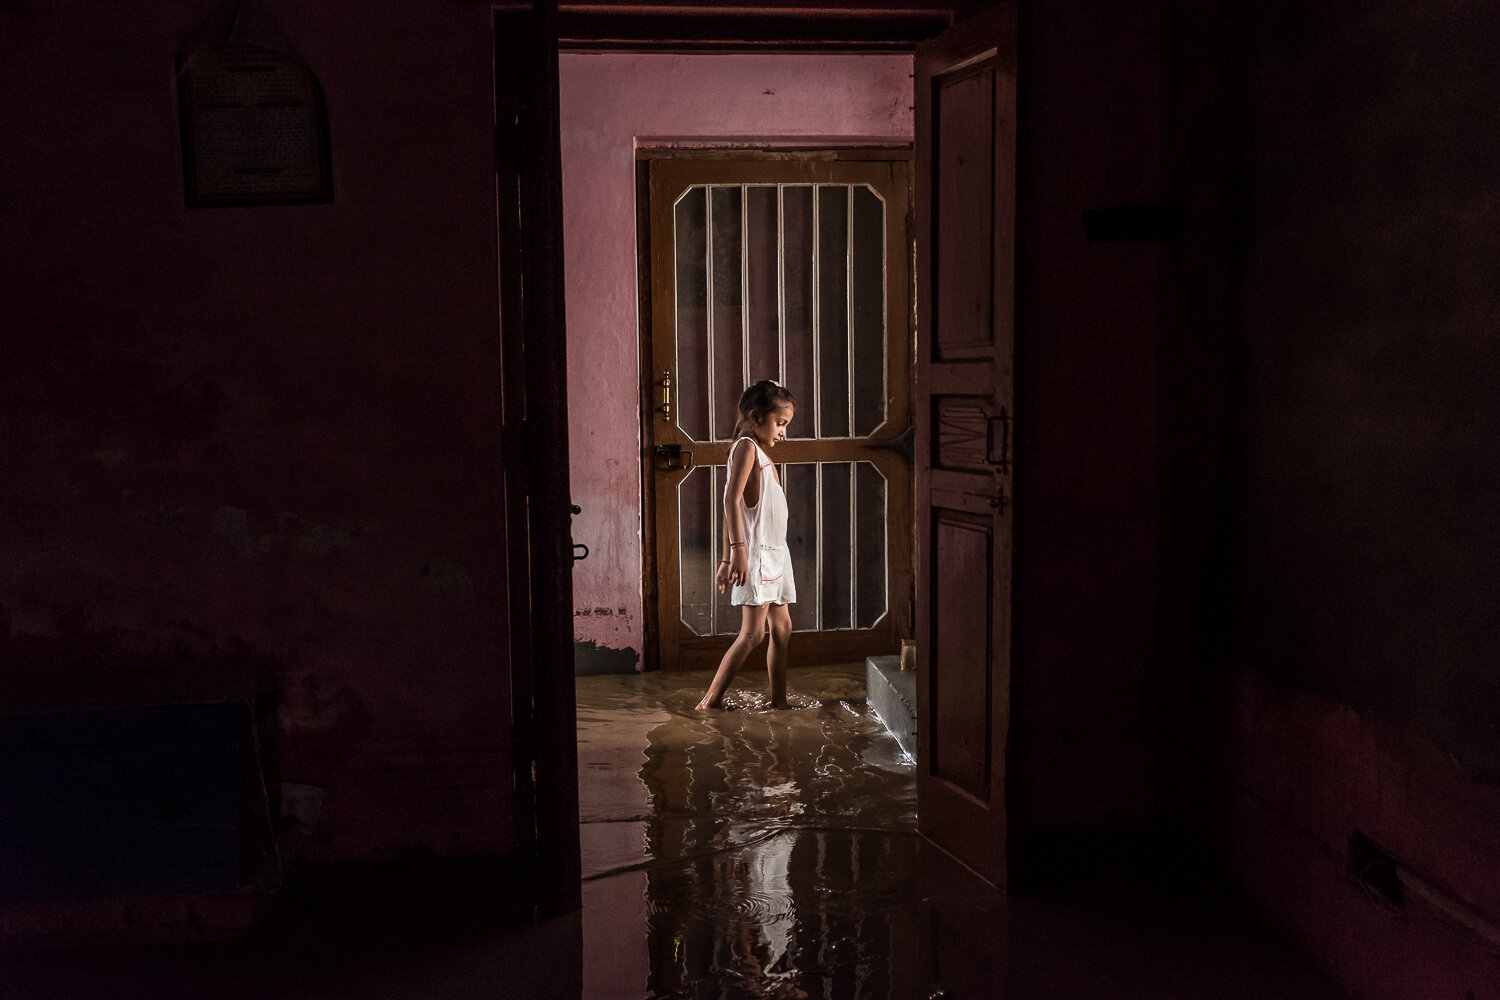  The floor of a house is covered with standing water after the canal slicing through town flooded at around 7am that morning on Tuesday, August 8, 2017 in Nai Basti, India. Many of the 150 houses in the village were damaged by the flooding. 